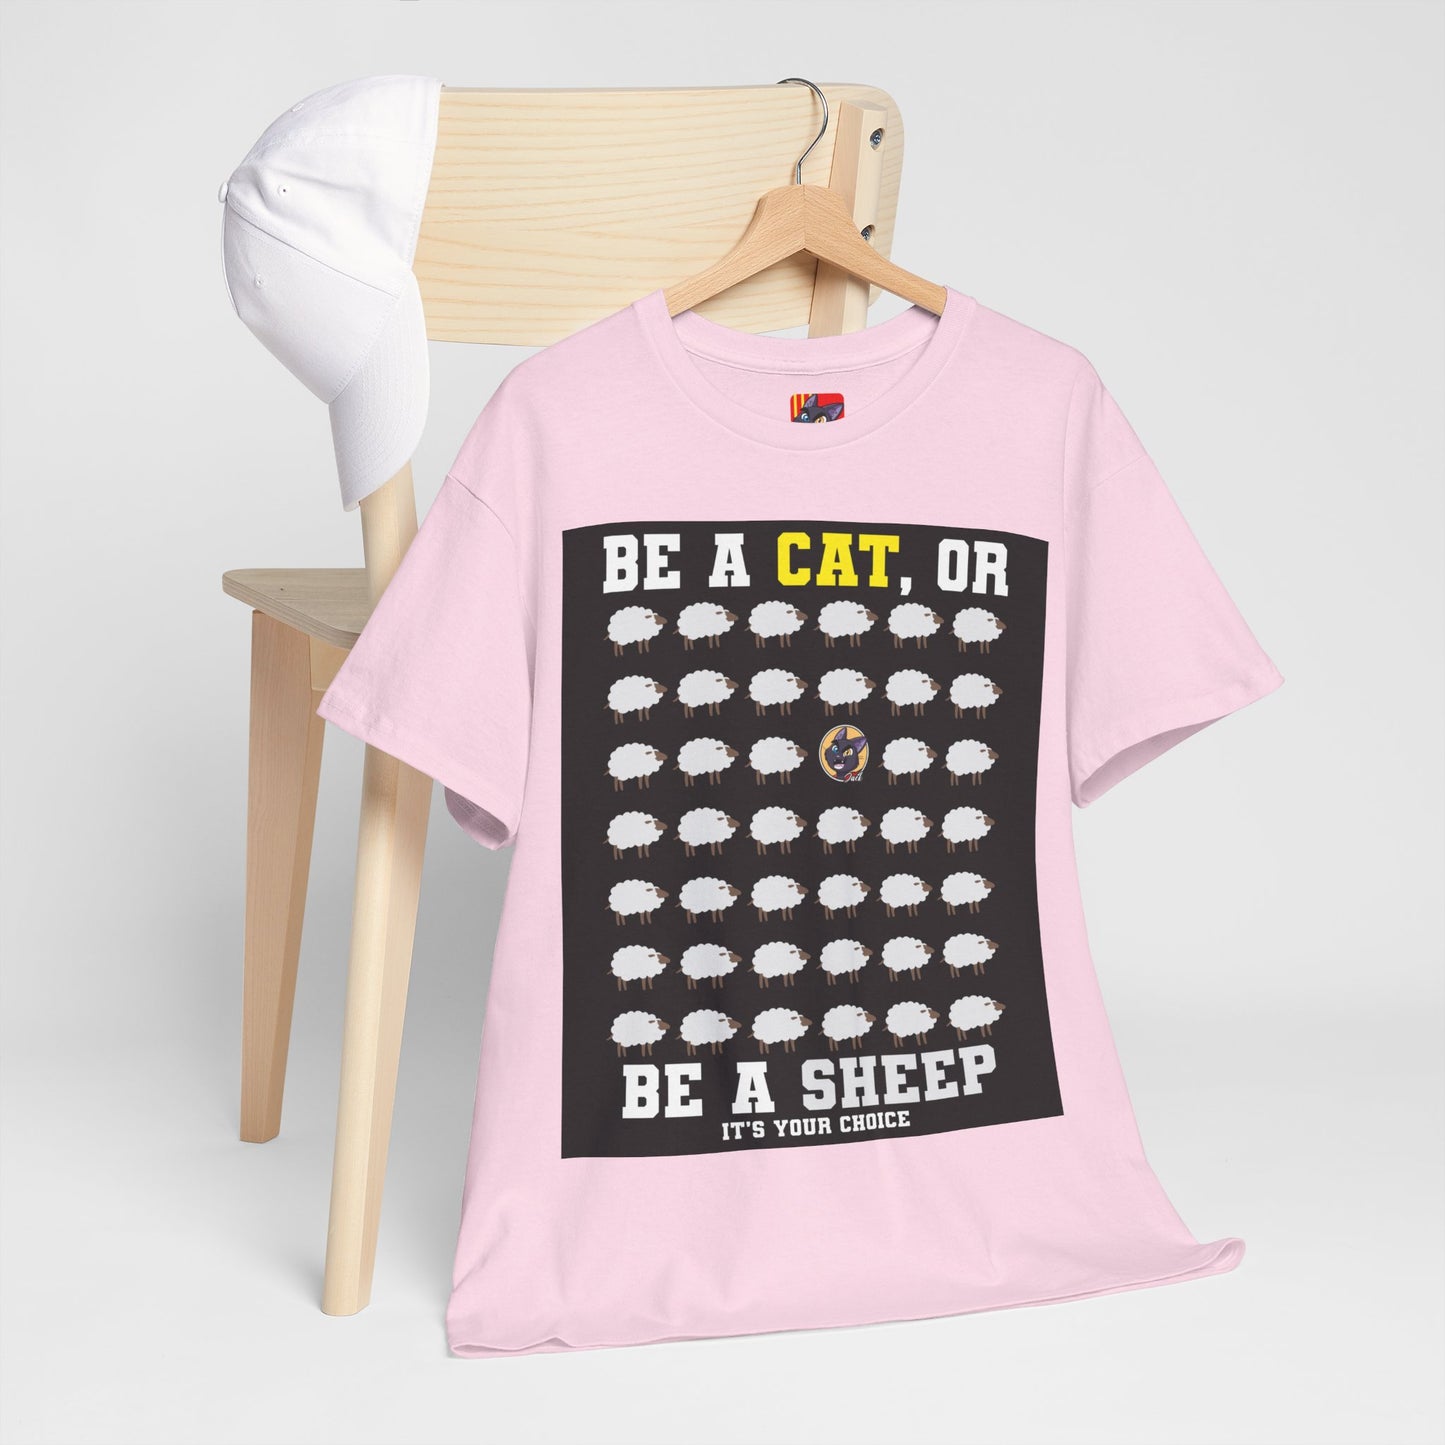 The Critical Thinker T-Shirt: Be a cat or be a sheep it's your choice